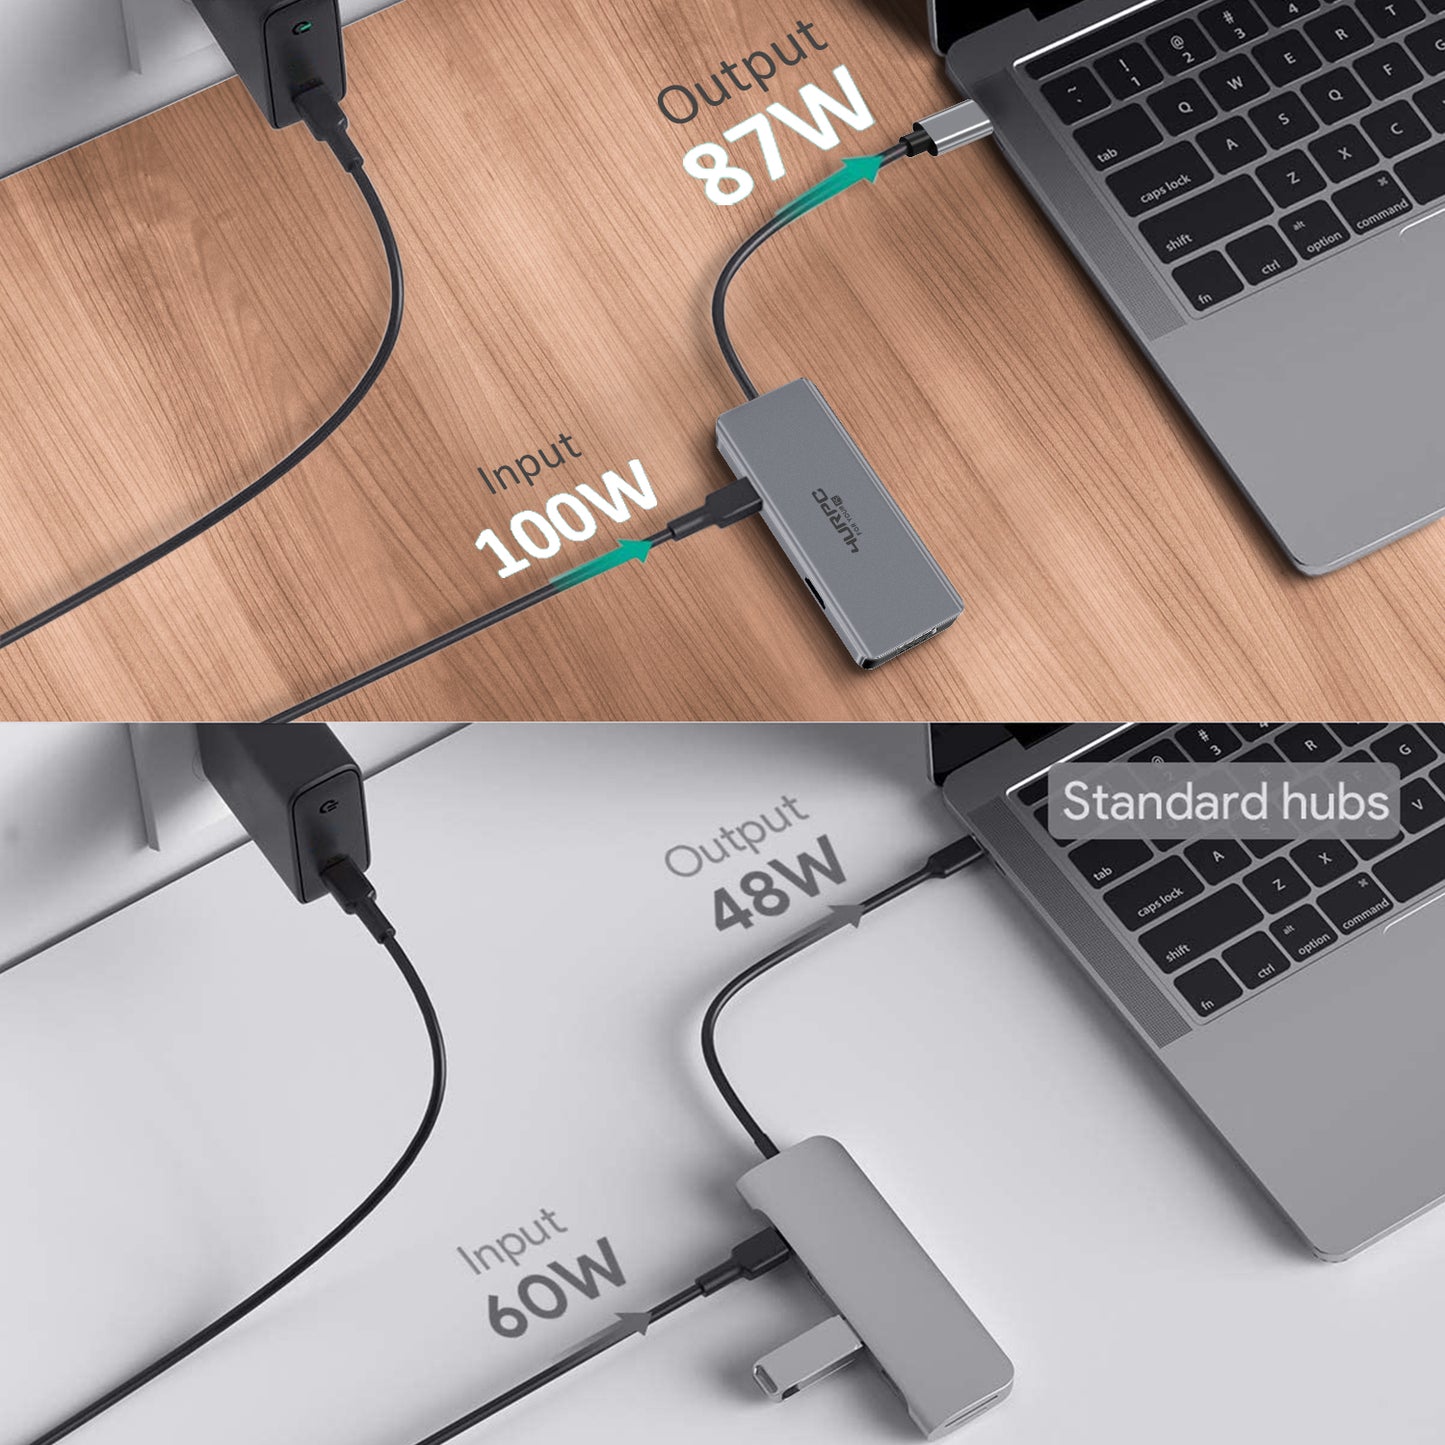 4URPC 8-IN-1 USB C Hub HDMI Adapter for USB Type-C Devices HU-103